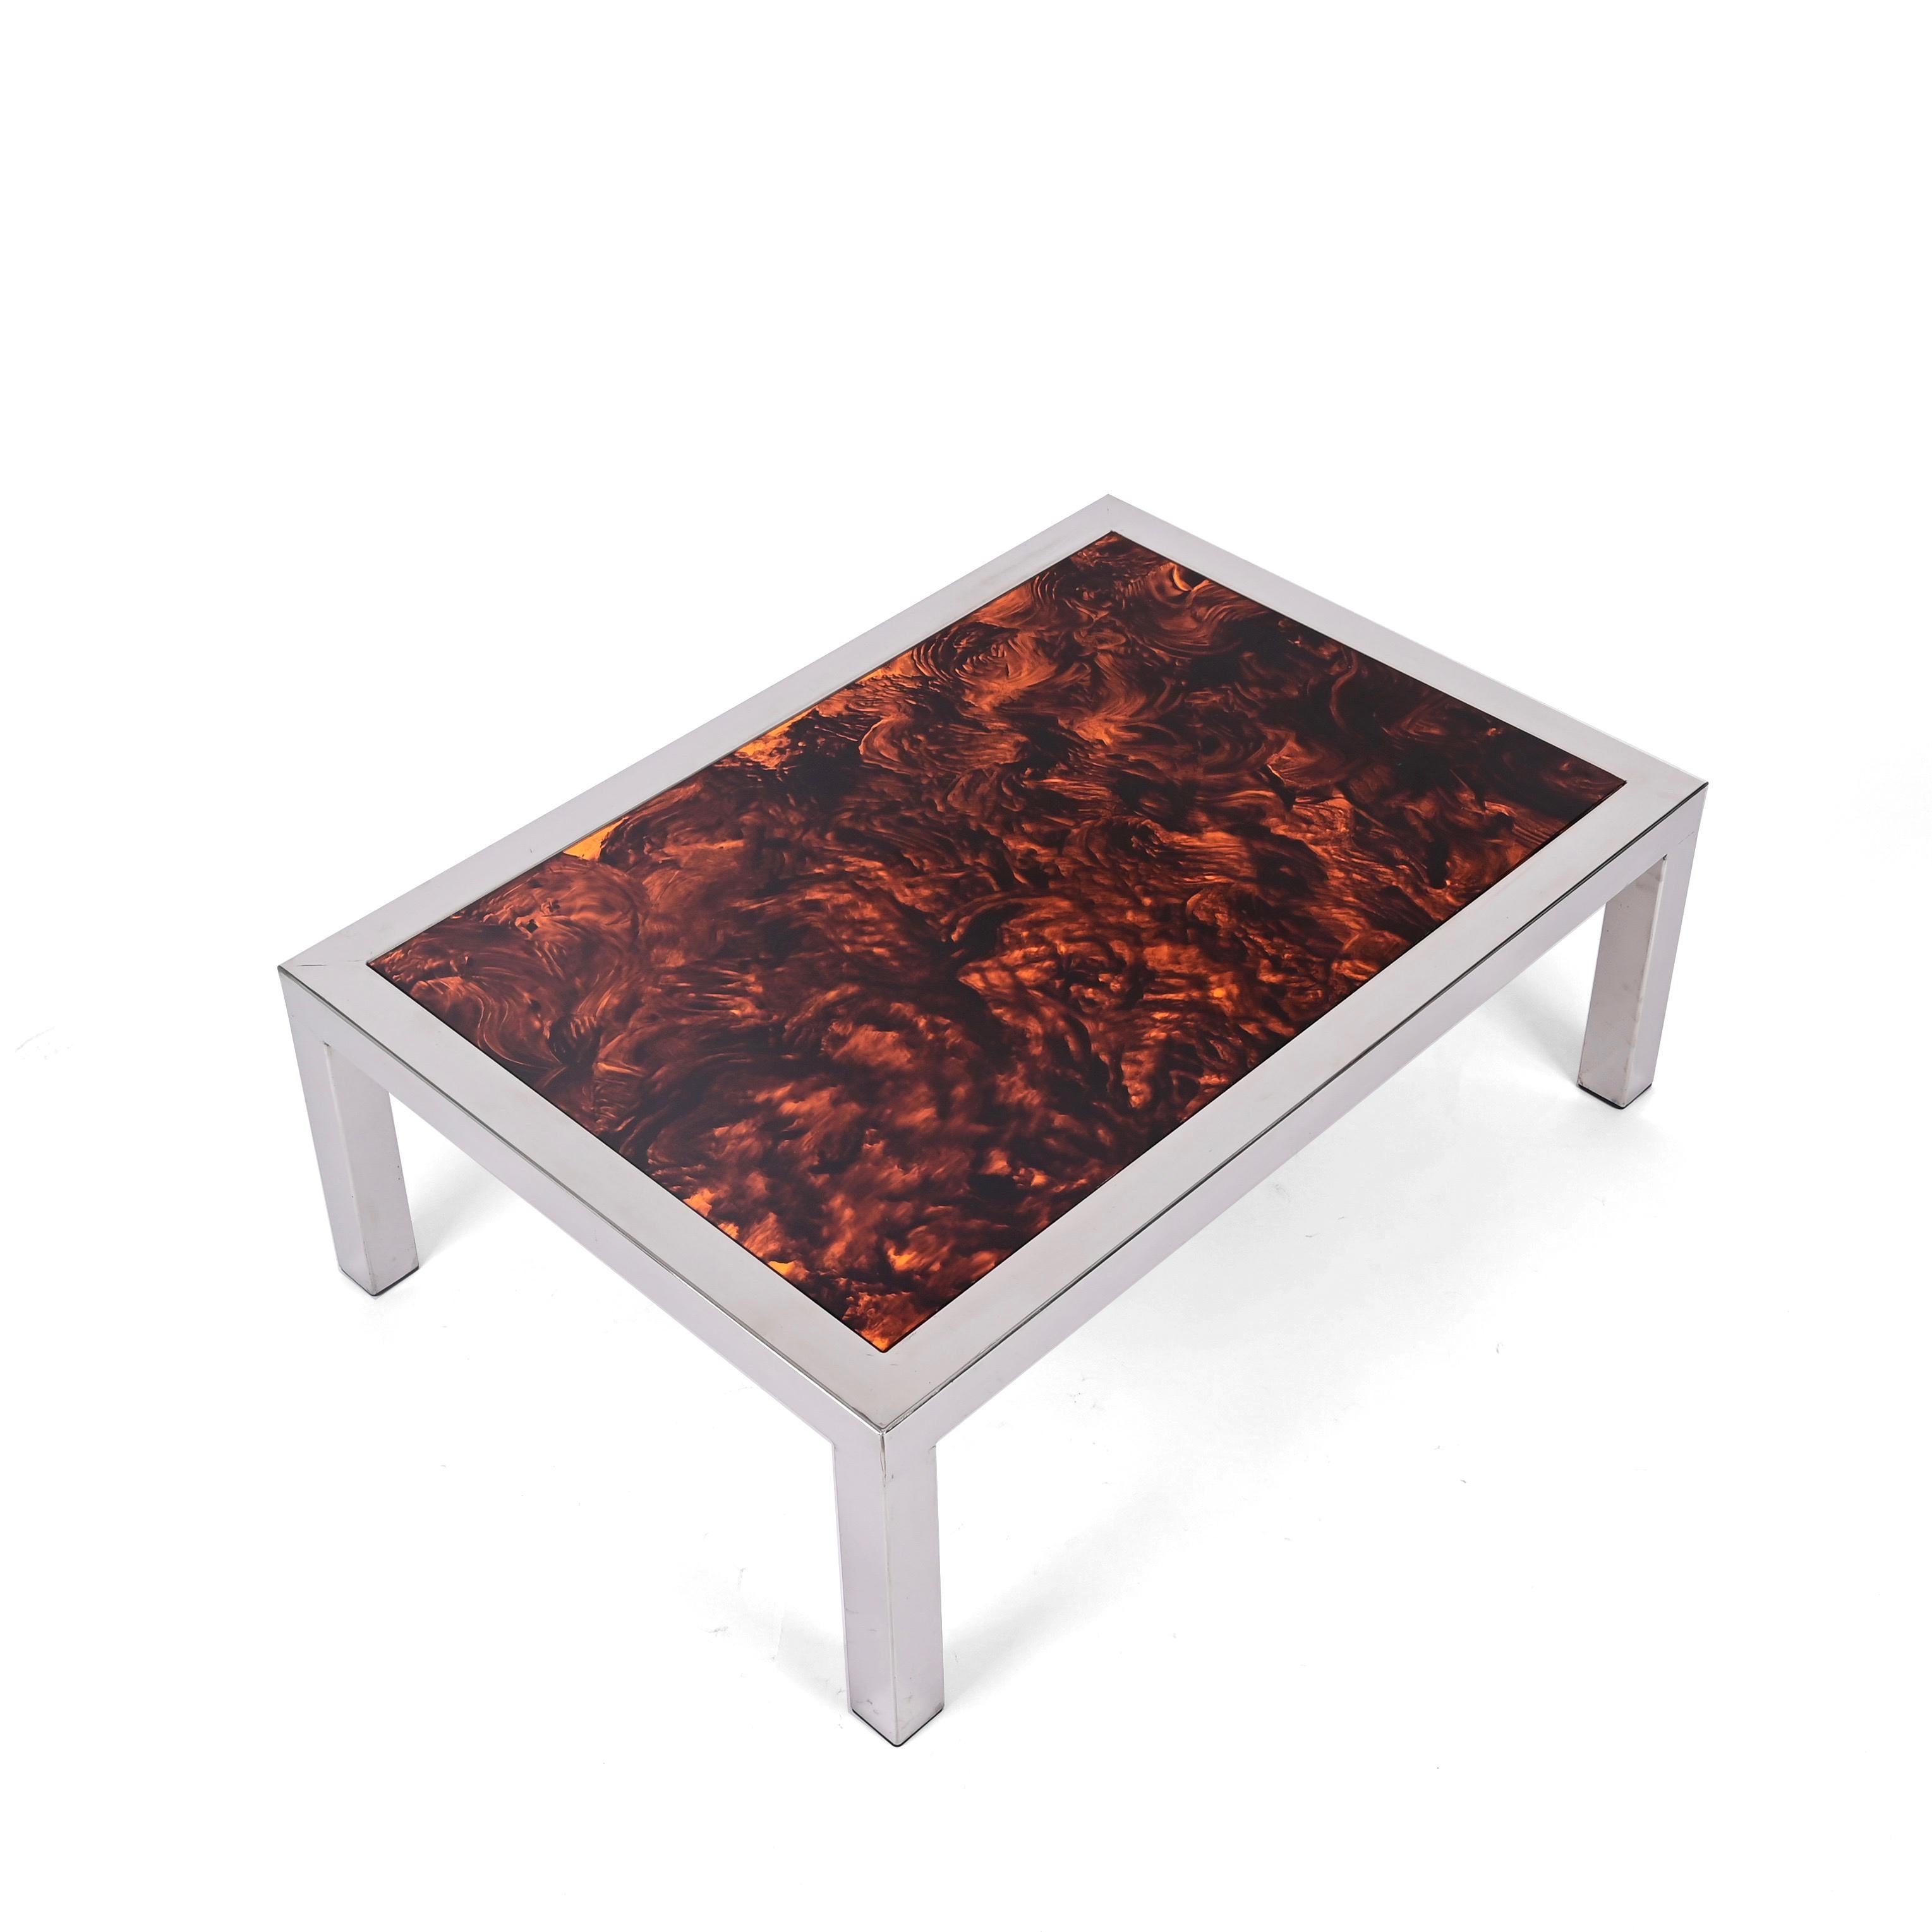 Chromed Steel and Tortoiseshell Effect Lucite Coffee Table, Italy 1970s For Sale 8